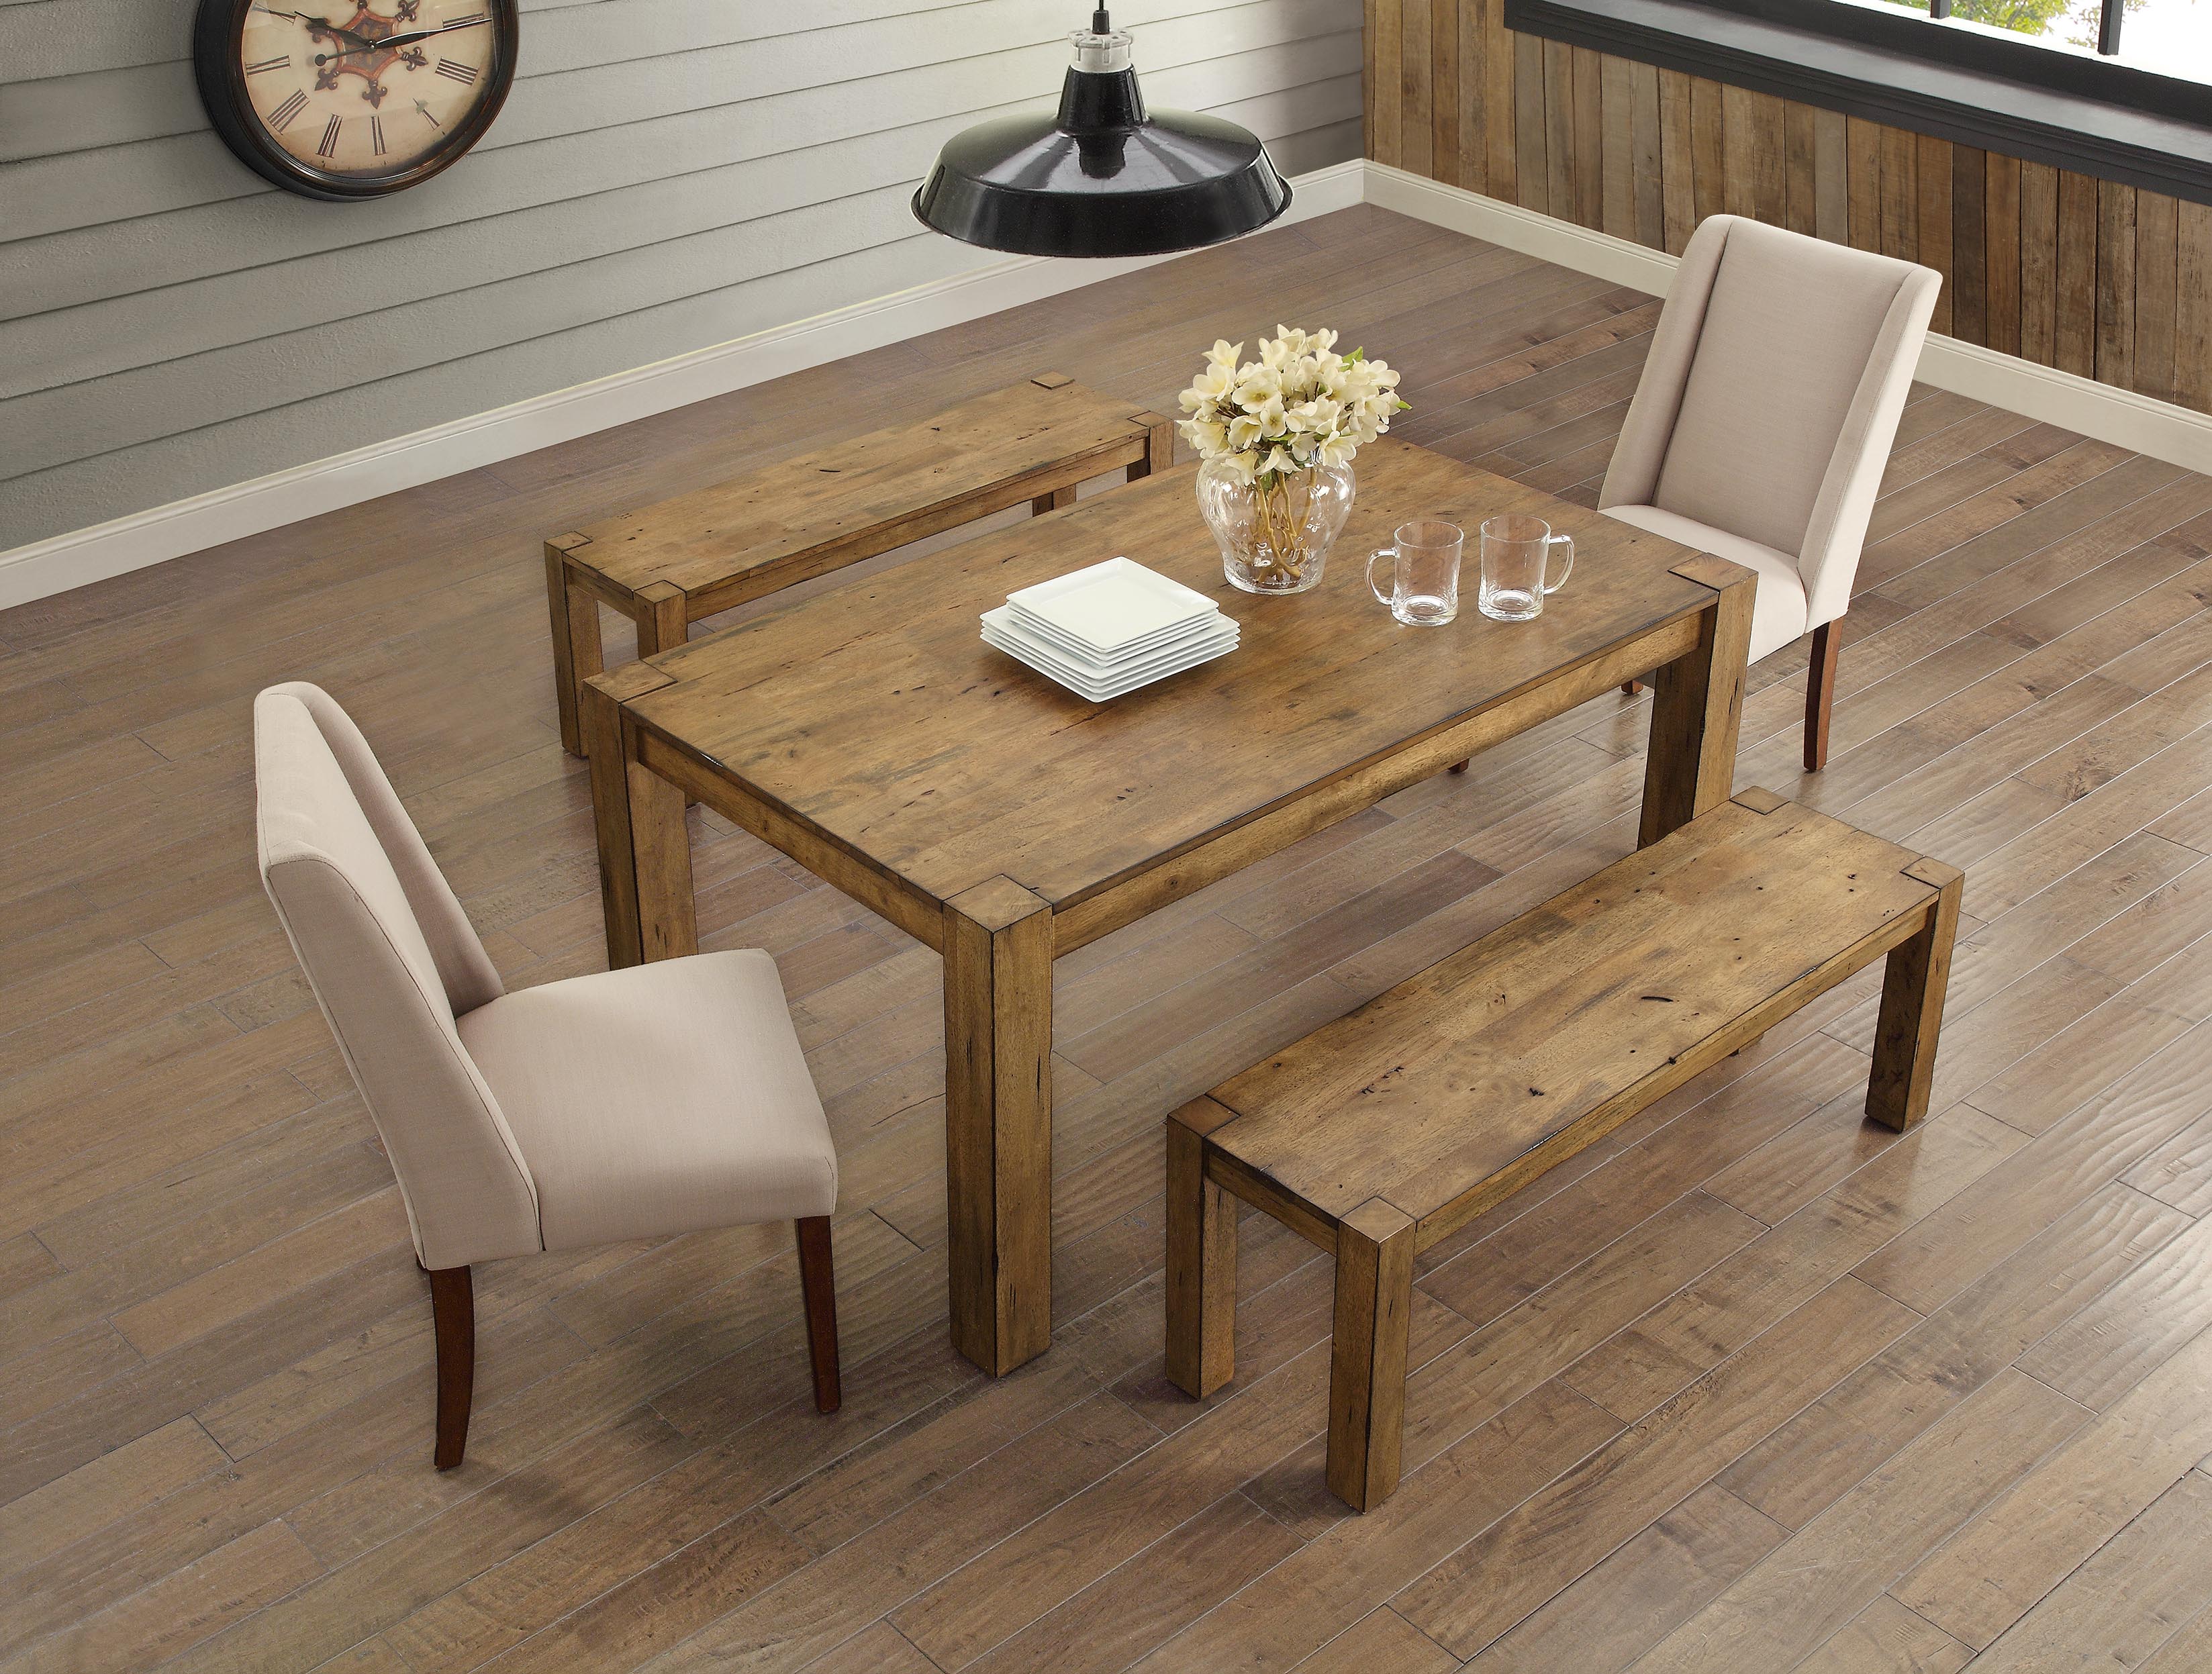 Better Homes & Gardens Bryant Solid Wood Dining Table, Rustic Brown - image 6 of 14